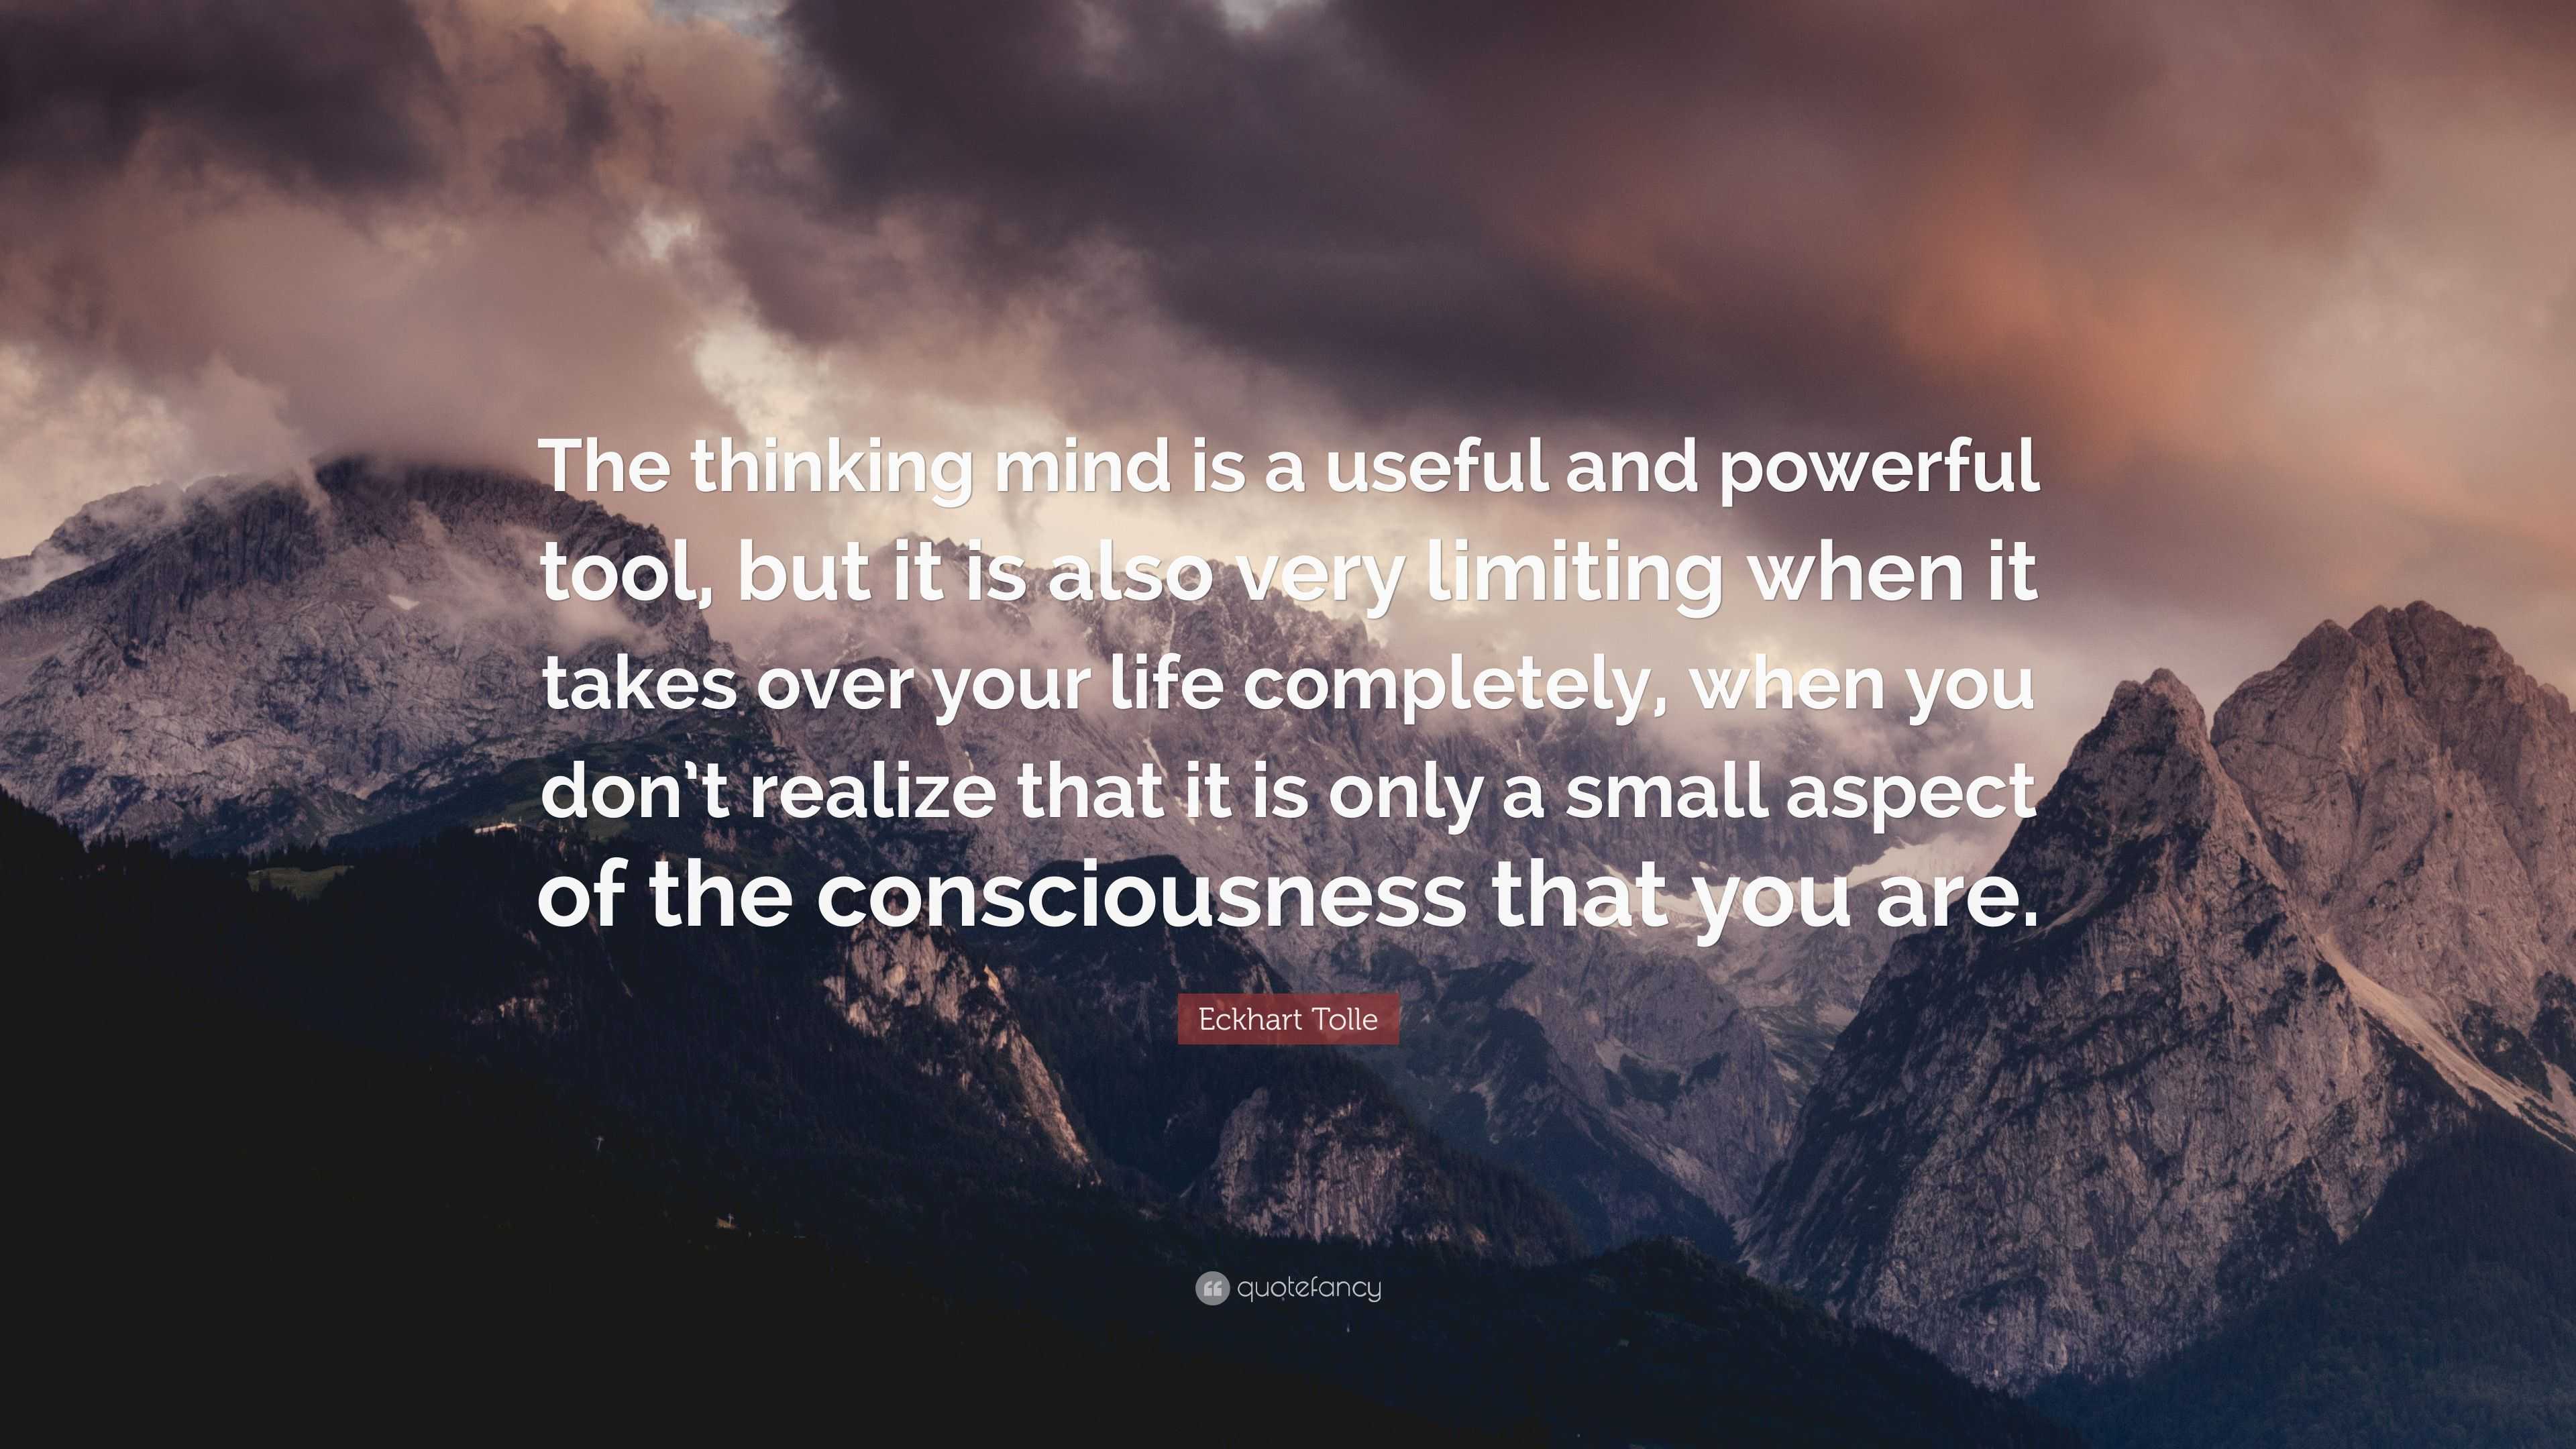 Eckhart Tolle Quote: “The thinking mind is a useful and powerful tool ...